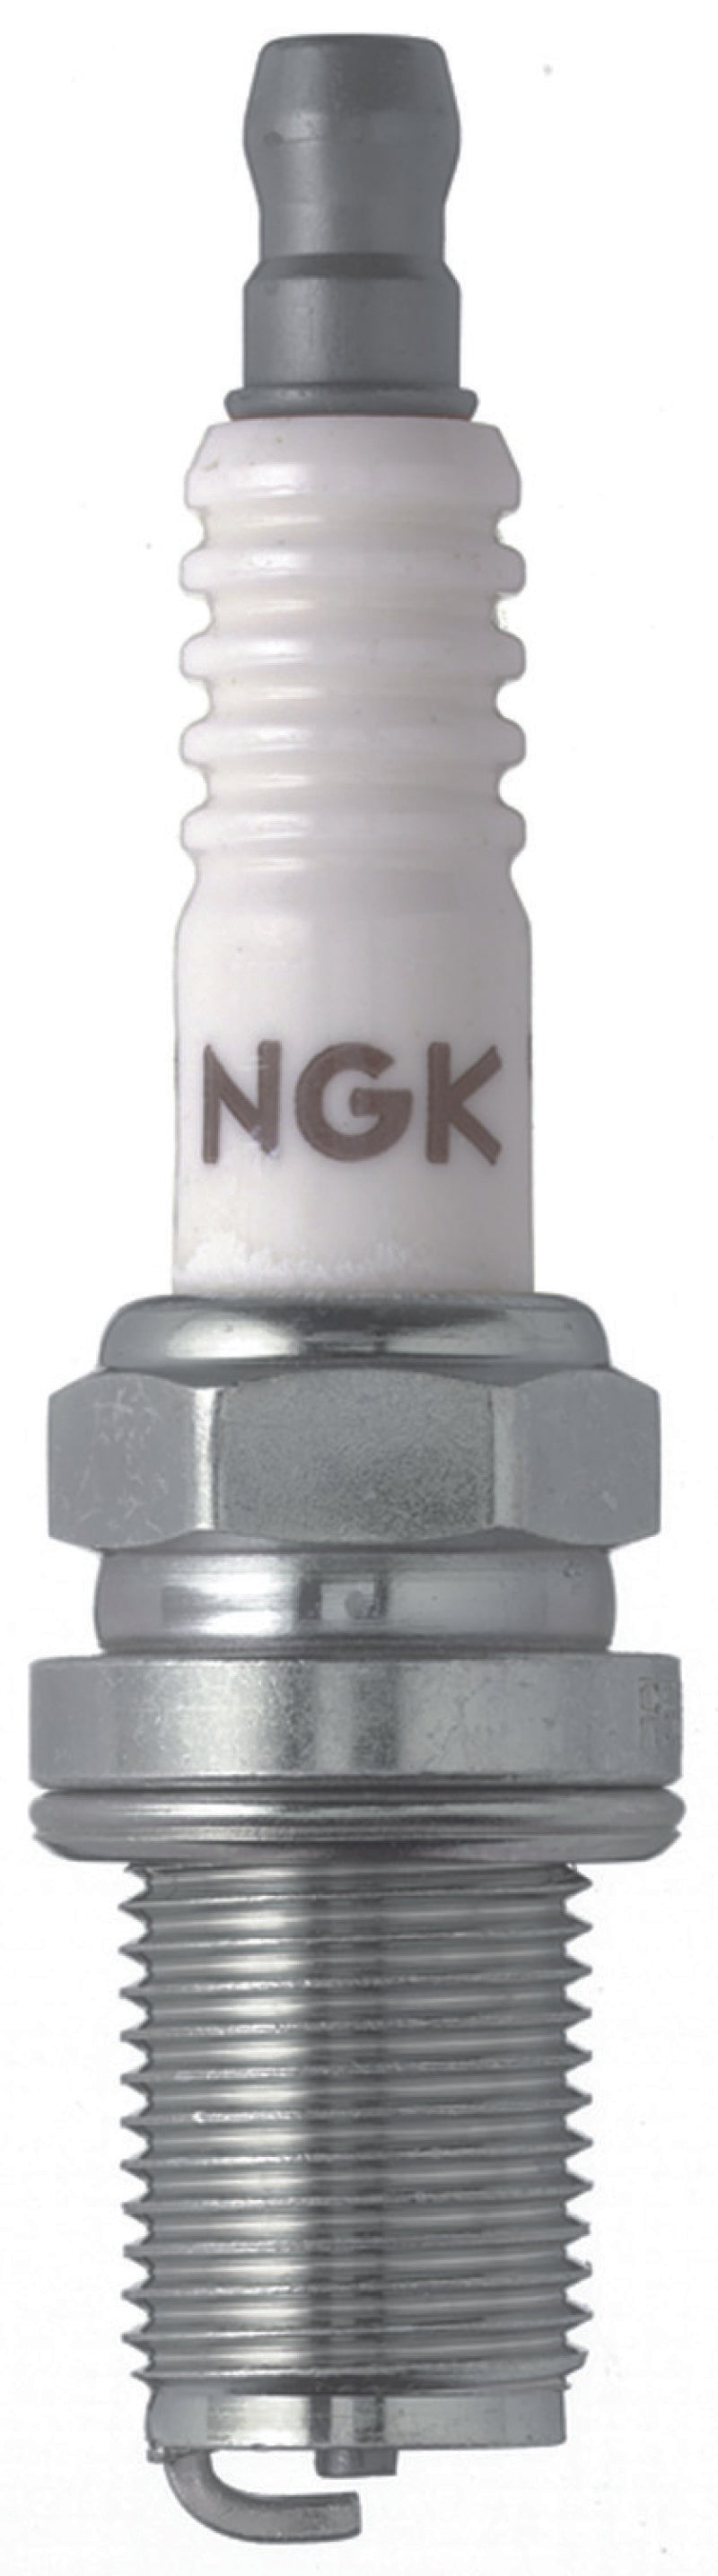 NGK Racing Spark Plug Box of 4 (R5671A-9) -  Shop now at Performance Car Parts